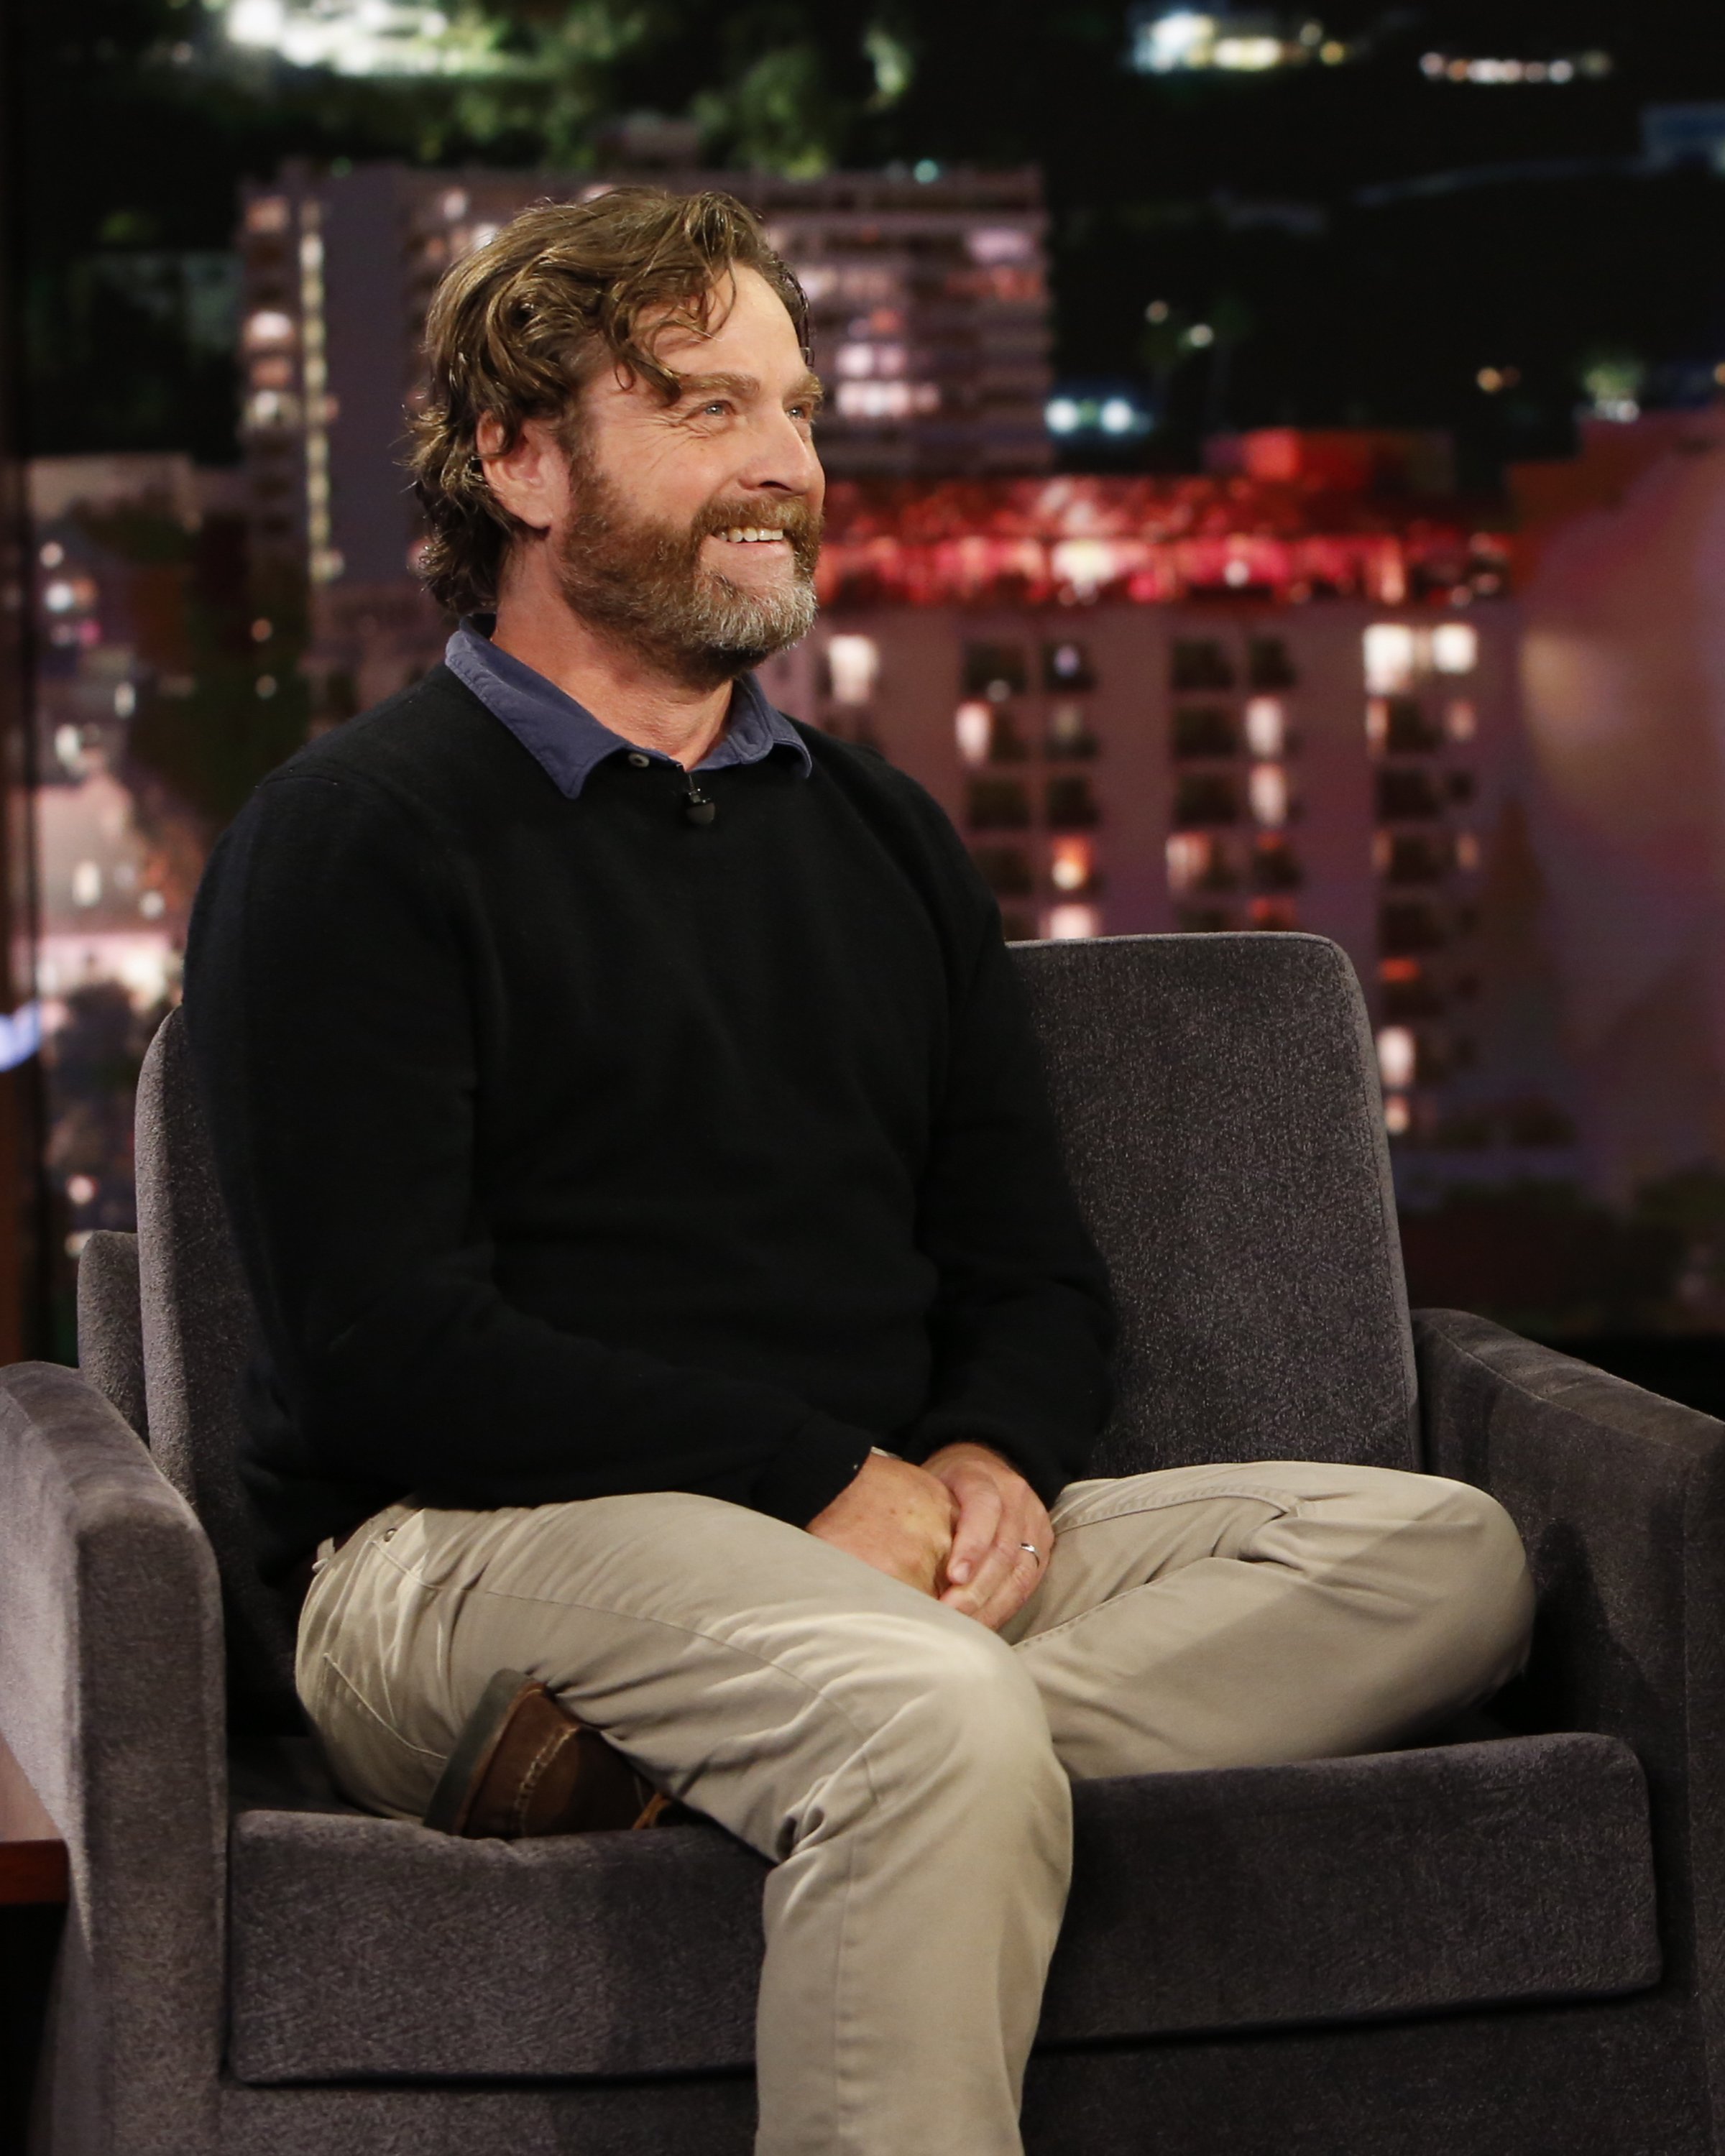 Zach Galifianakis on "Jimmy Kimmel LIVE!" on September 18, 2019. | Source: Getty Images 